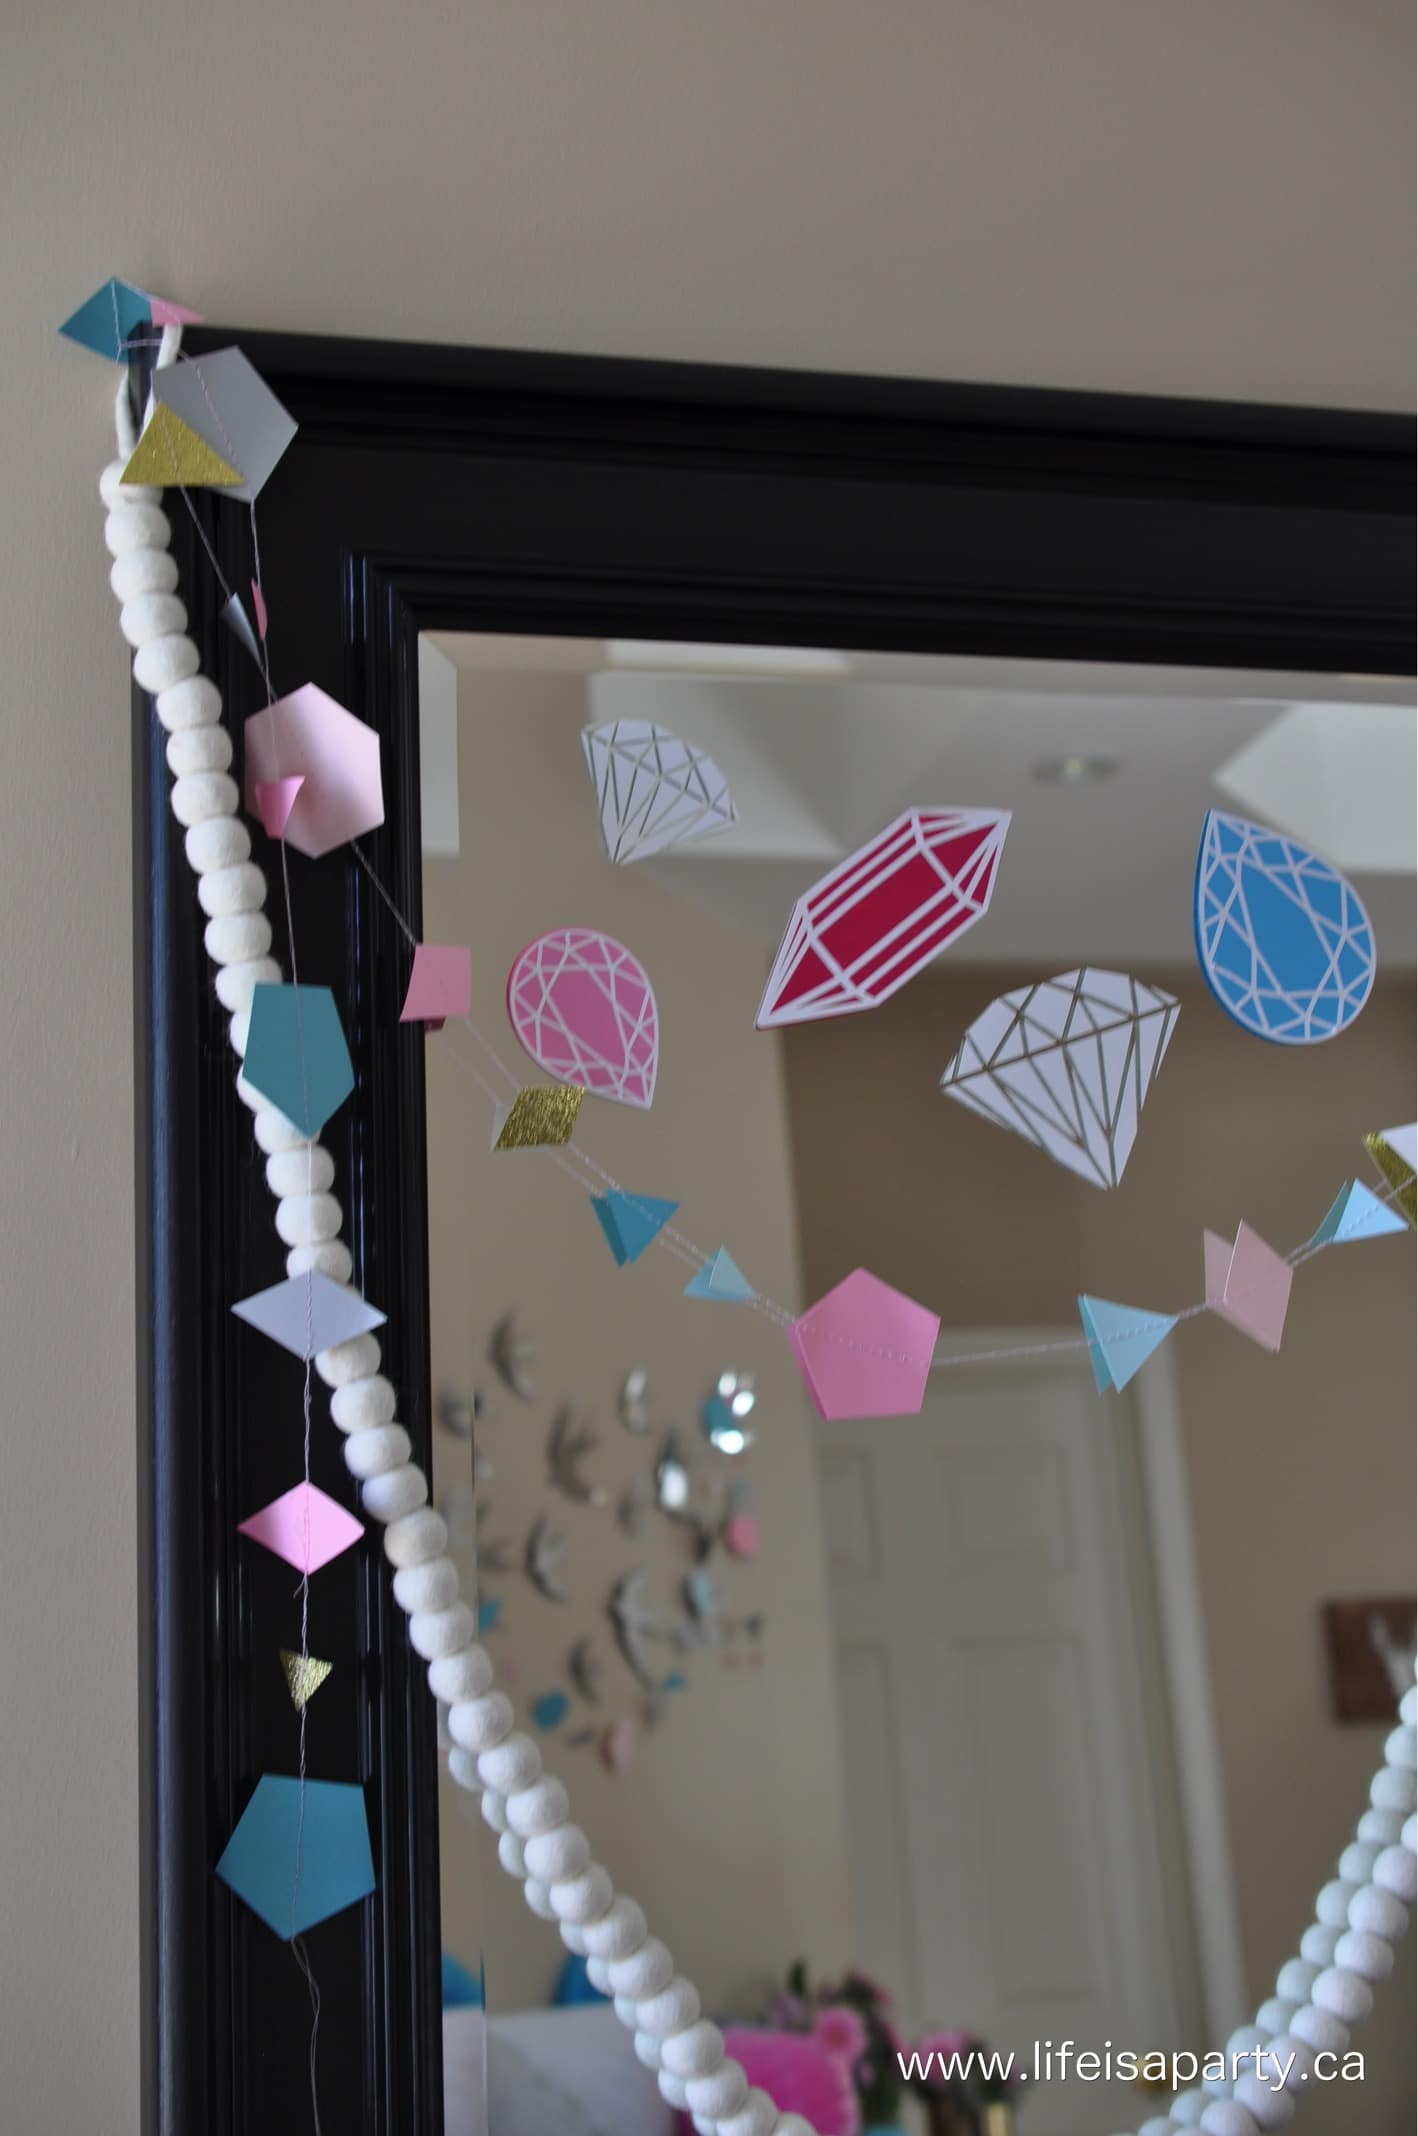 gem jewel decals and party decorations